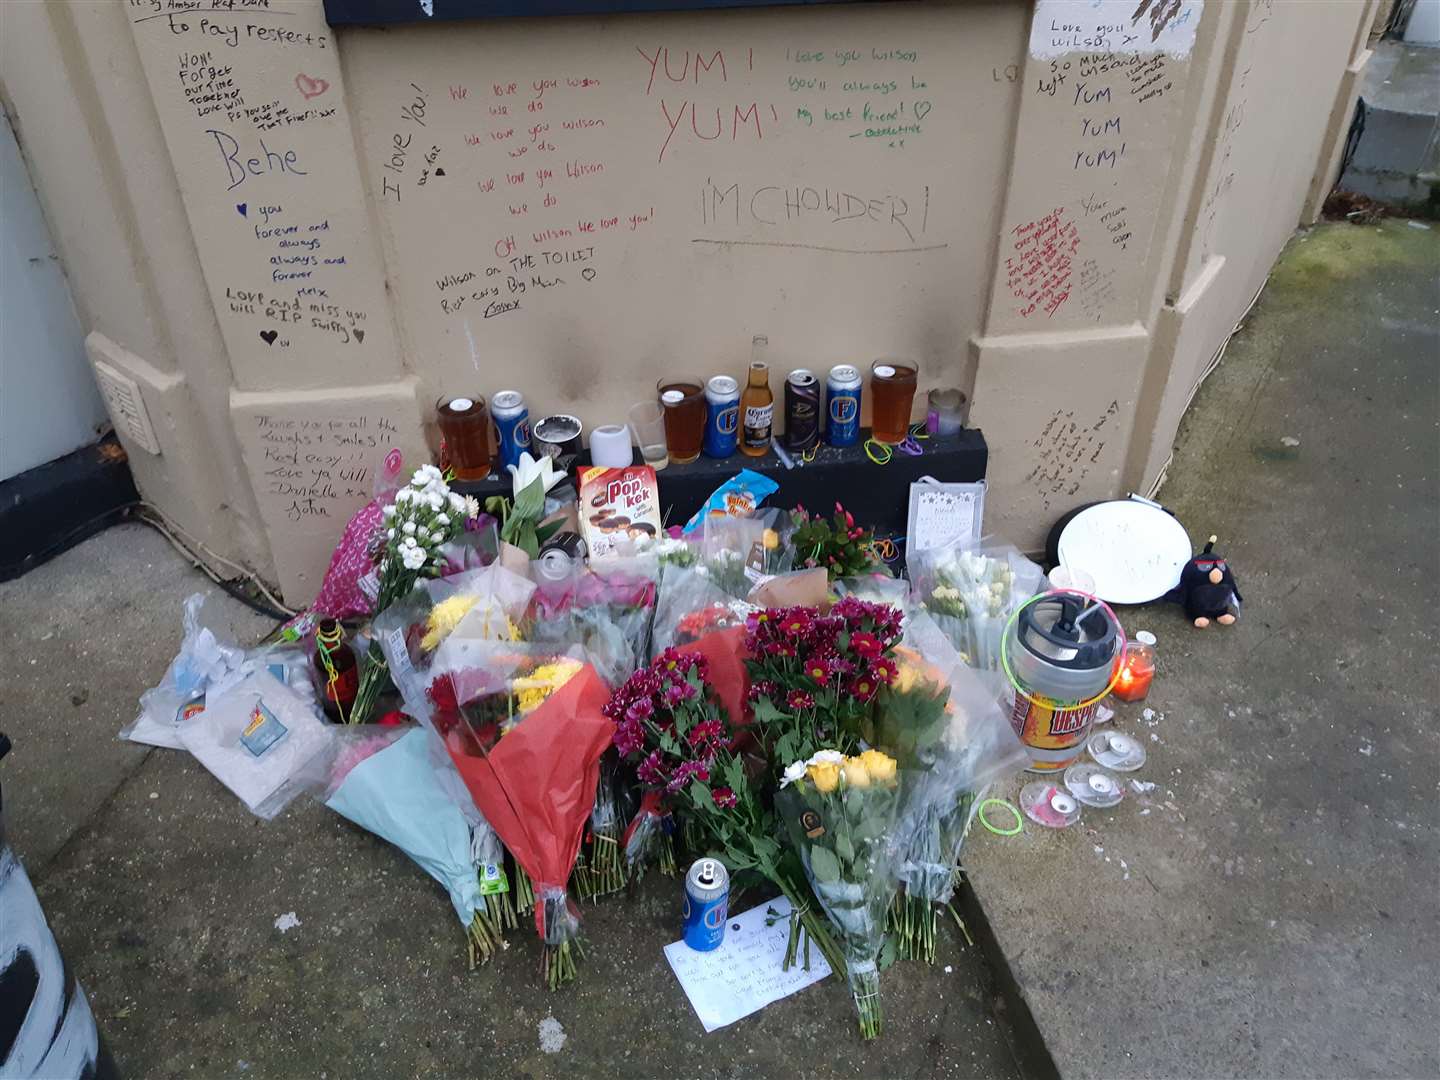 The tributes for William Wilson outside his home just after his death